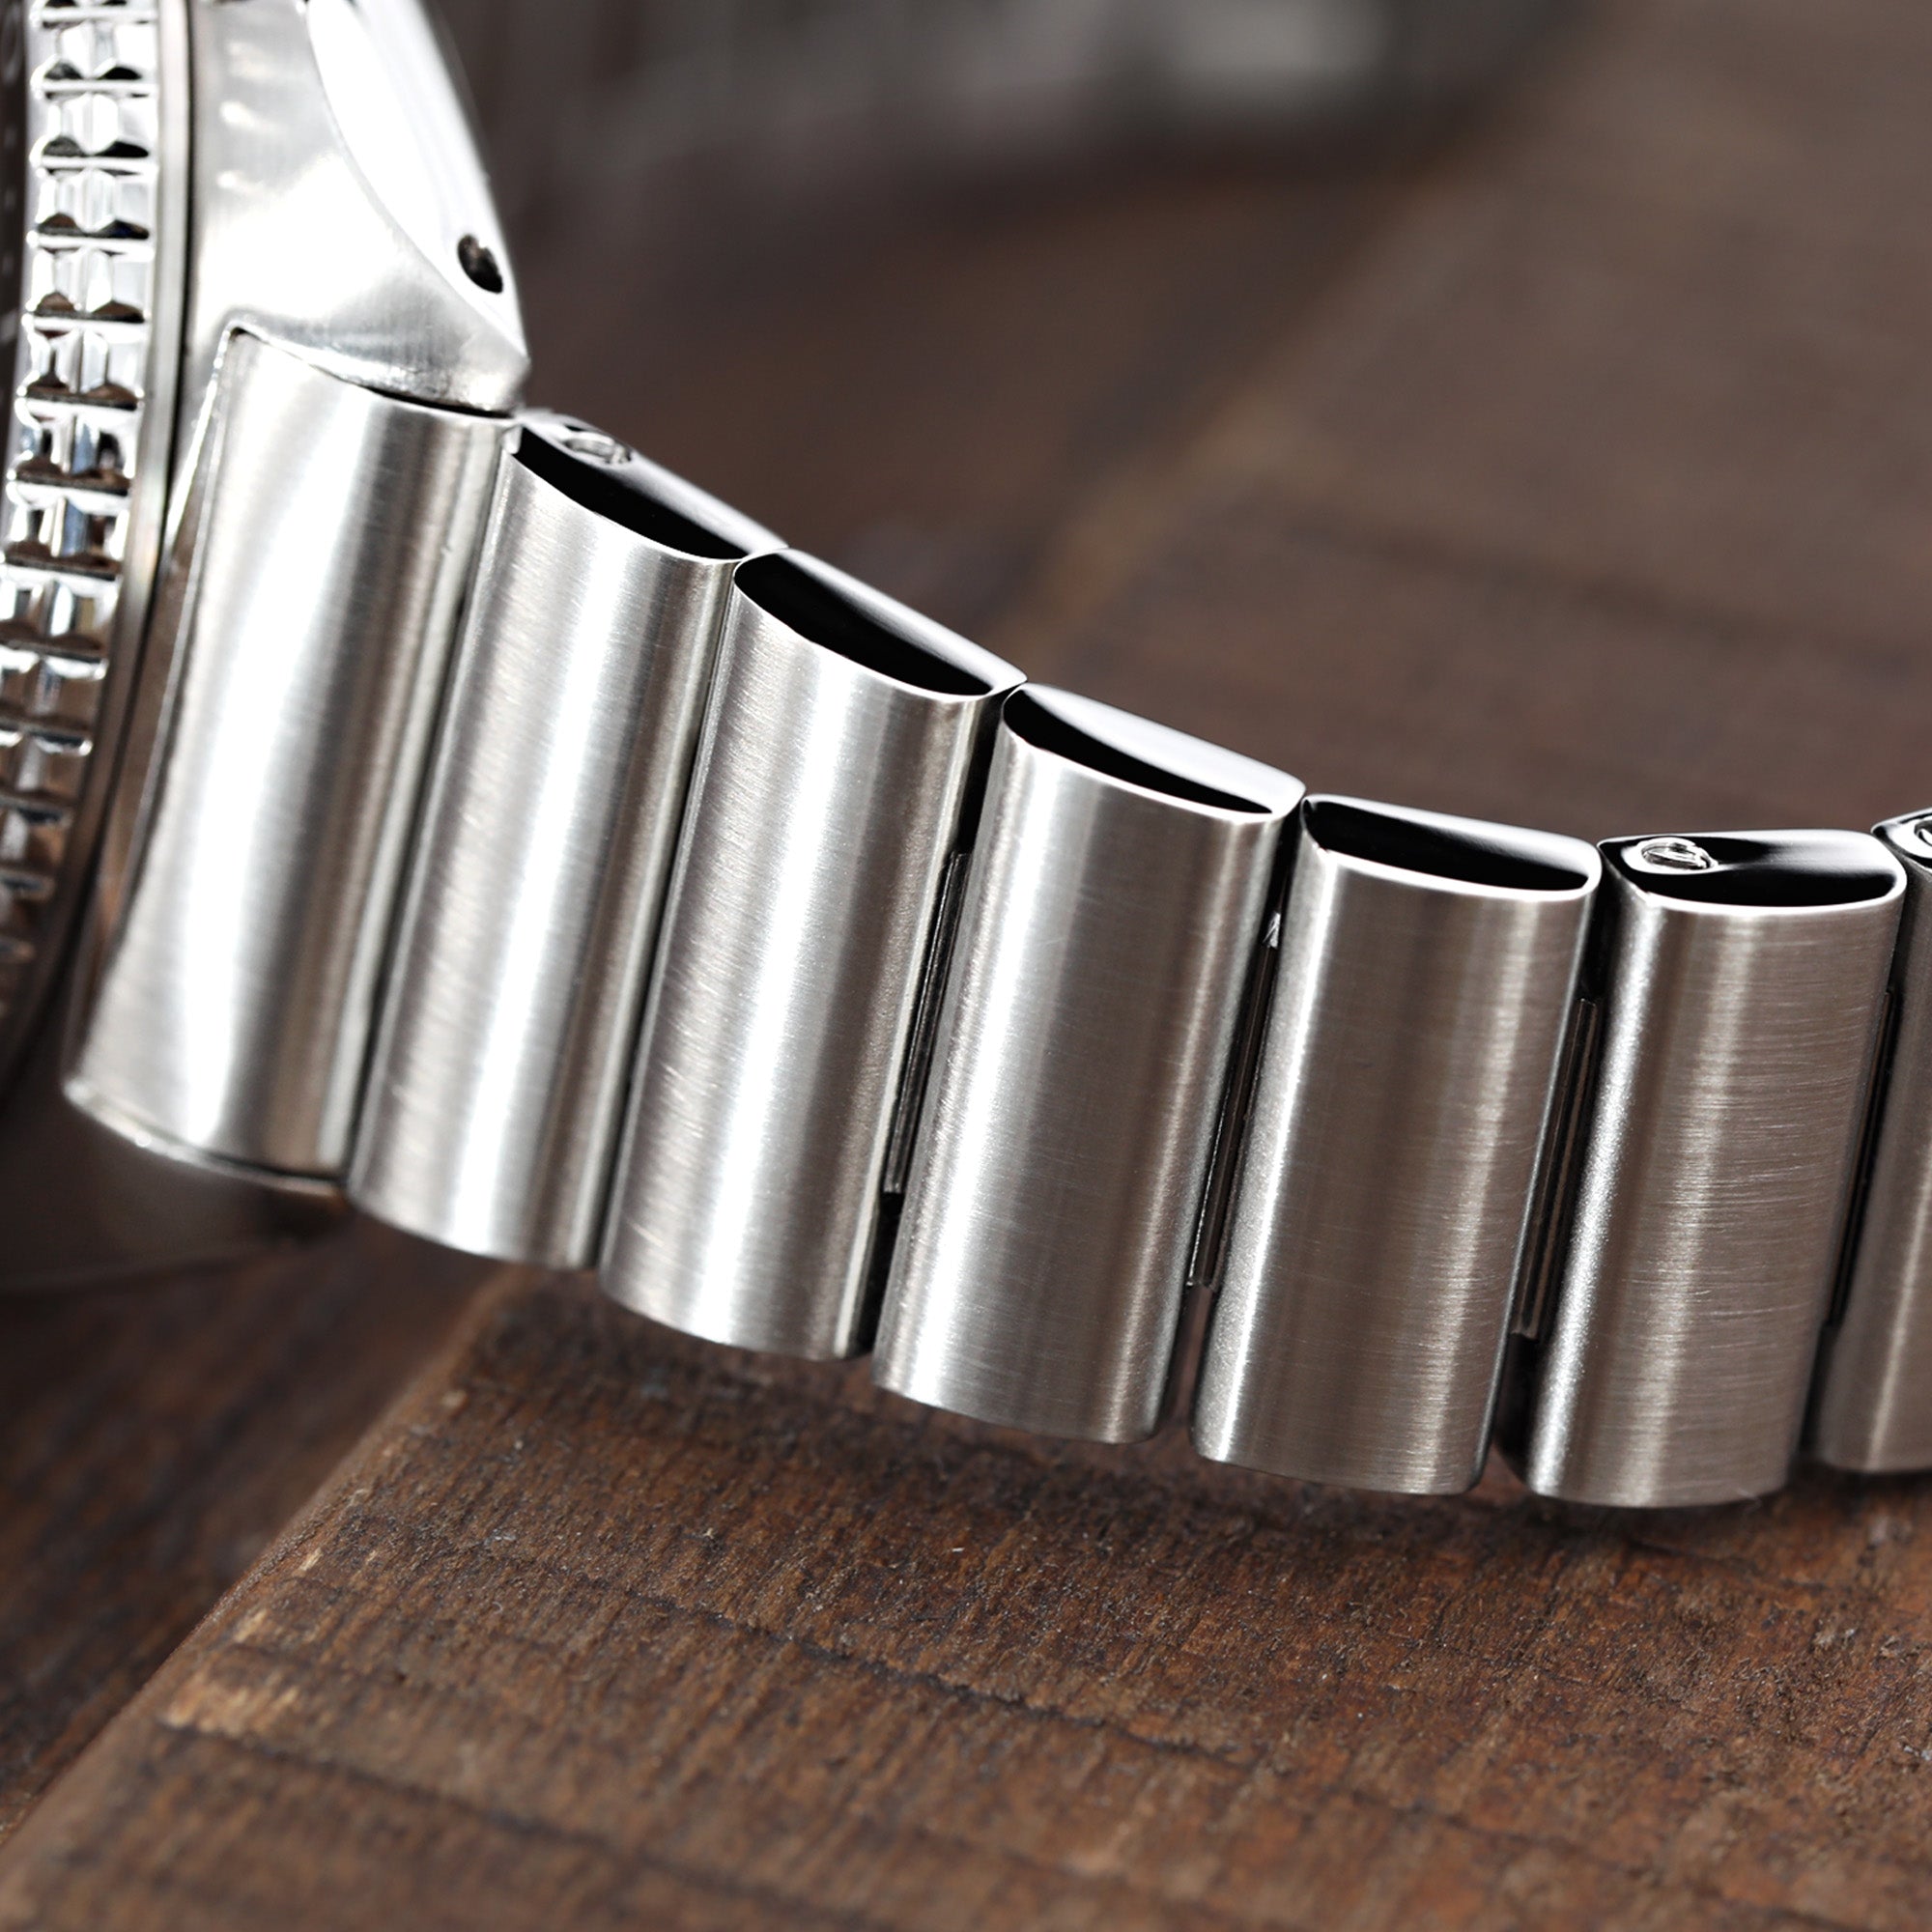 Watch Bands  Most Common Types of Watch Bands Explained - Strapcode